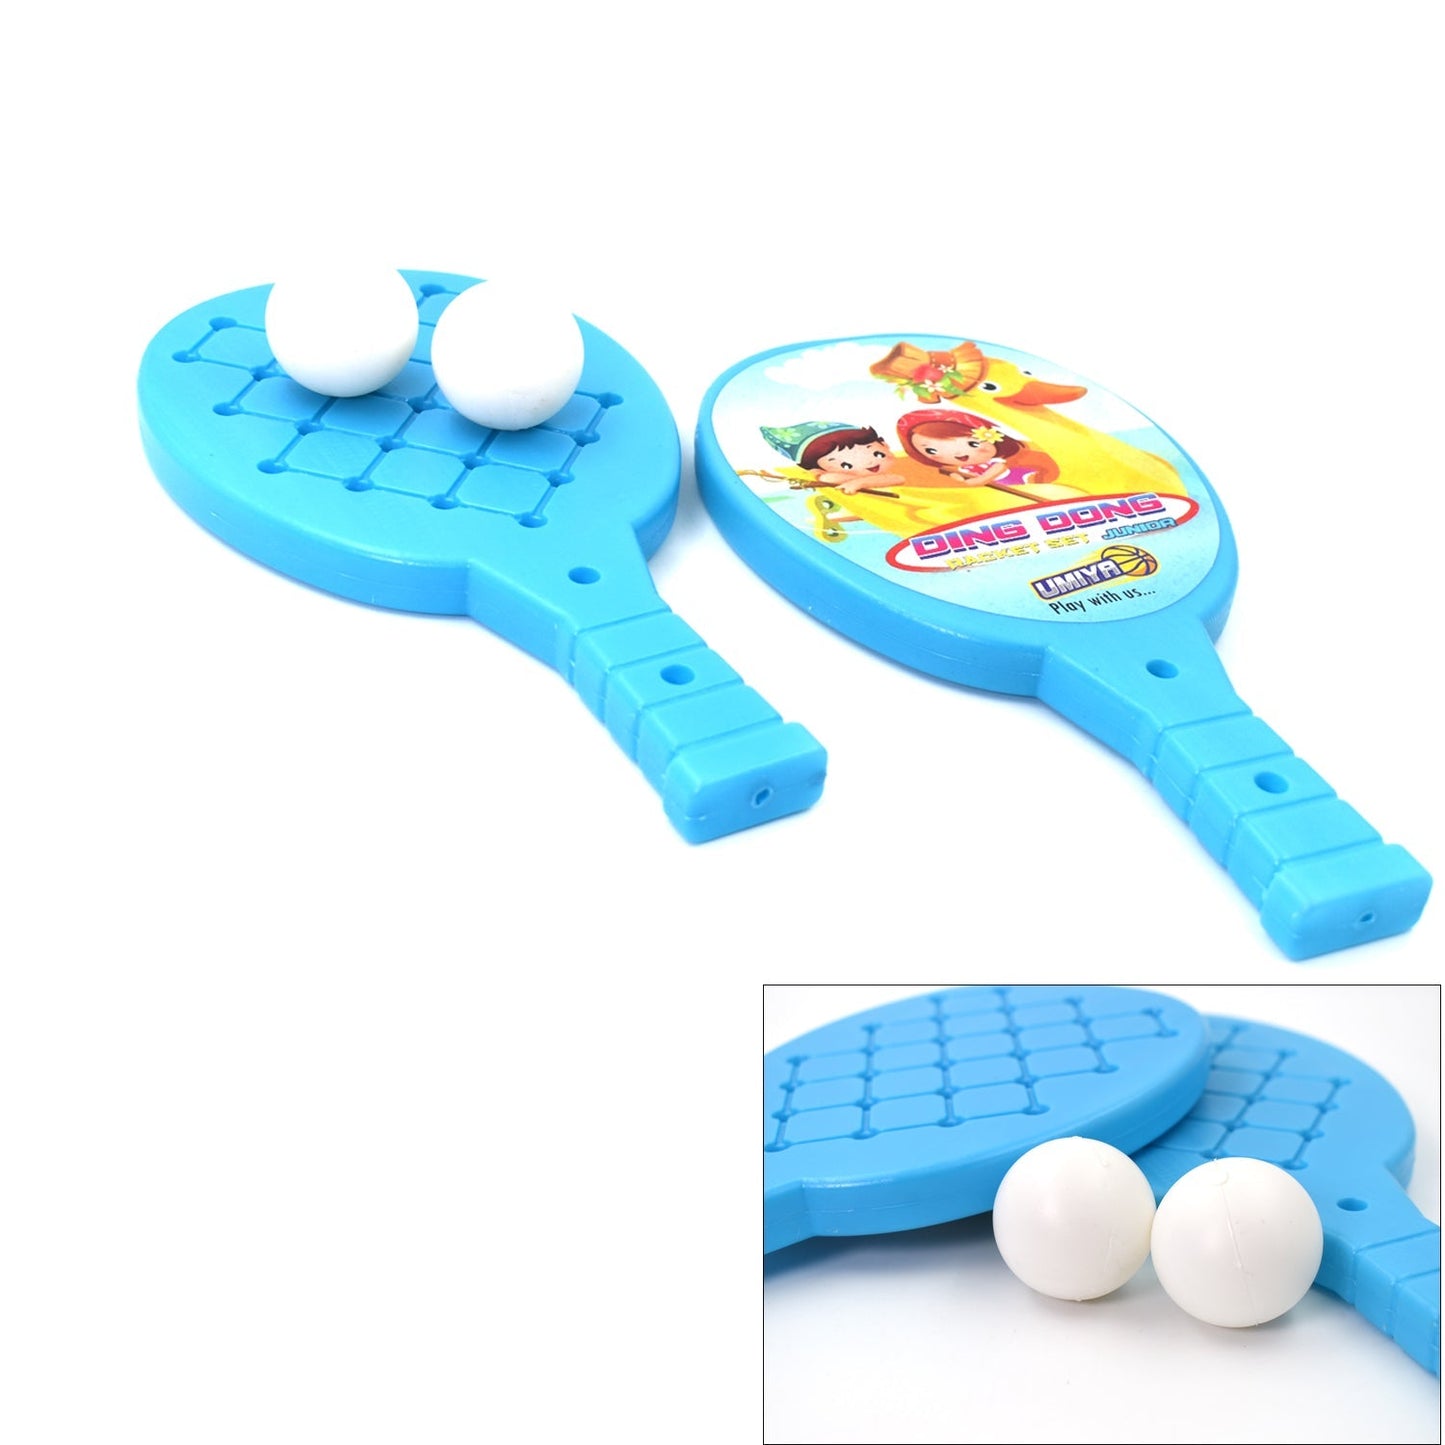 4628 Racket Set with Ball for Kids Plastic Table Tennis Set for Kids 